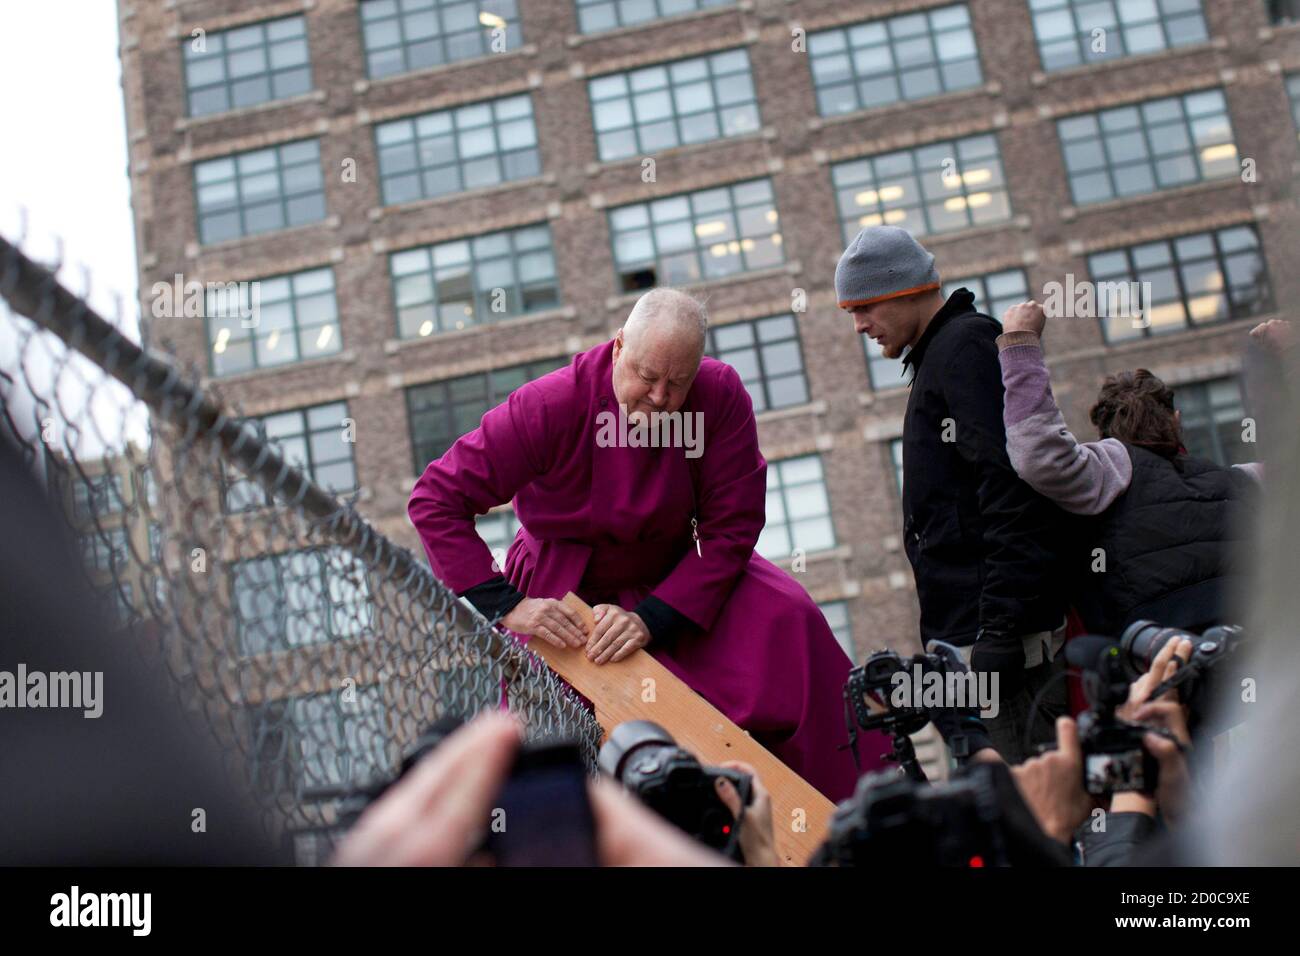 Retired Episcopal bishop George E. Packard (L), who is affiliated with the Occupy Wall Street movement, climbs a ladder to illegally trespass on a privately-owned piece of land near Juan Pablo Duarte Square during a march in New York December 17, 2011. Hundreds of anti-Wall Street protesters took to the New York streets on Saturday in an attempt to establish a new encampment, with a number arrested as they tried to move onto church-owned land. REUTERS/Andrew Burton (UNITED STATES - Tags: CIVIL UNREST POLITICS BUSINESS RELIGION TPX IMAGES OF THE DAY) Stock Photo